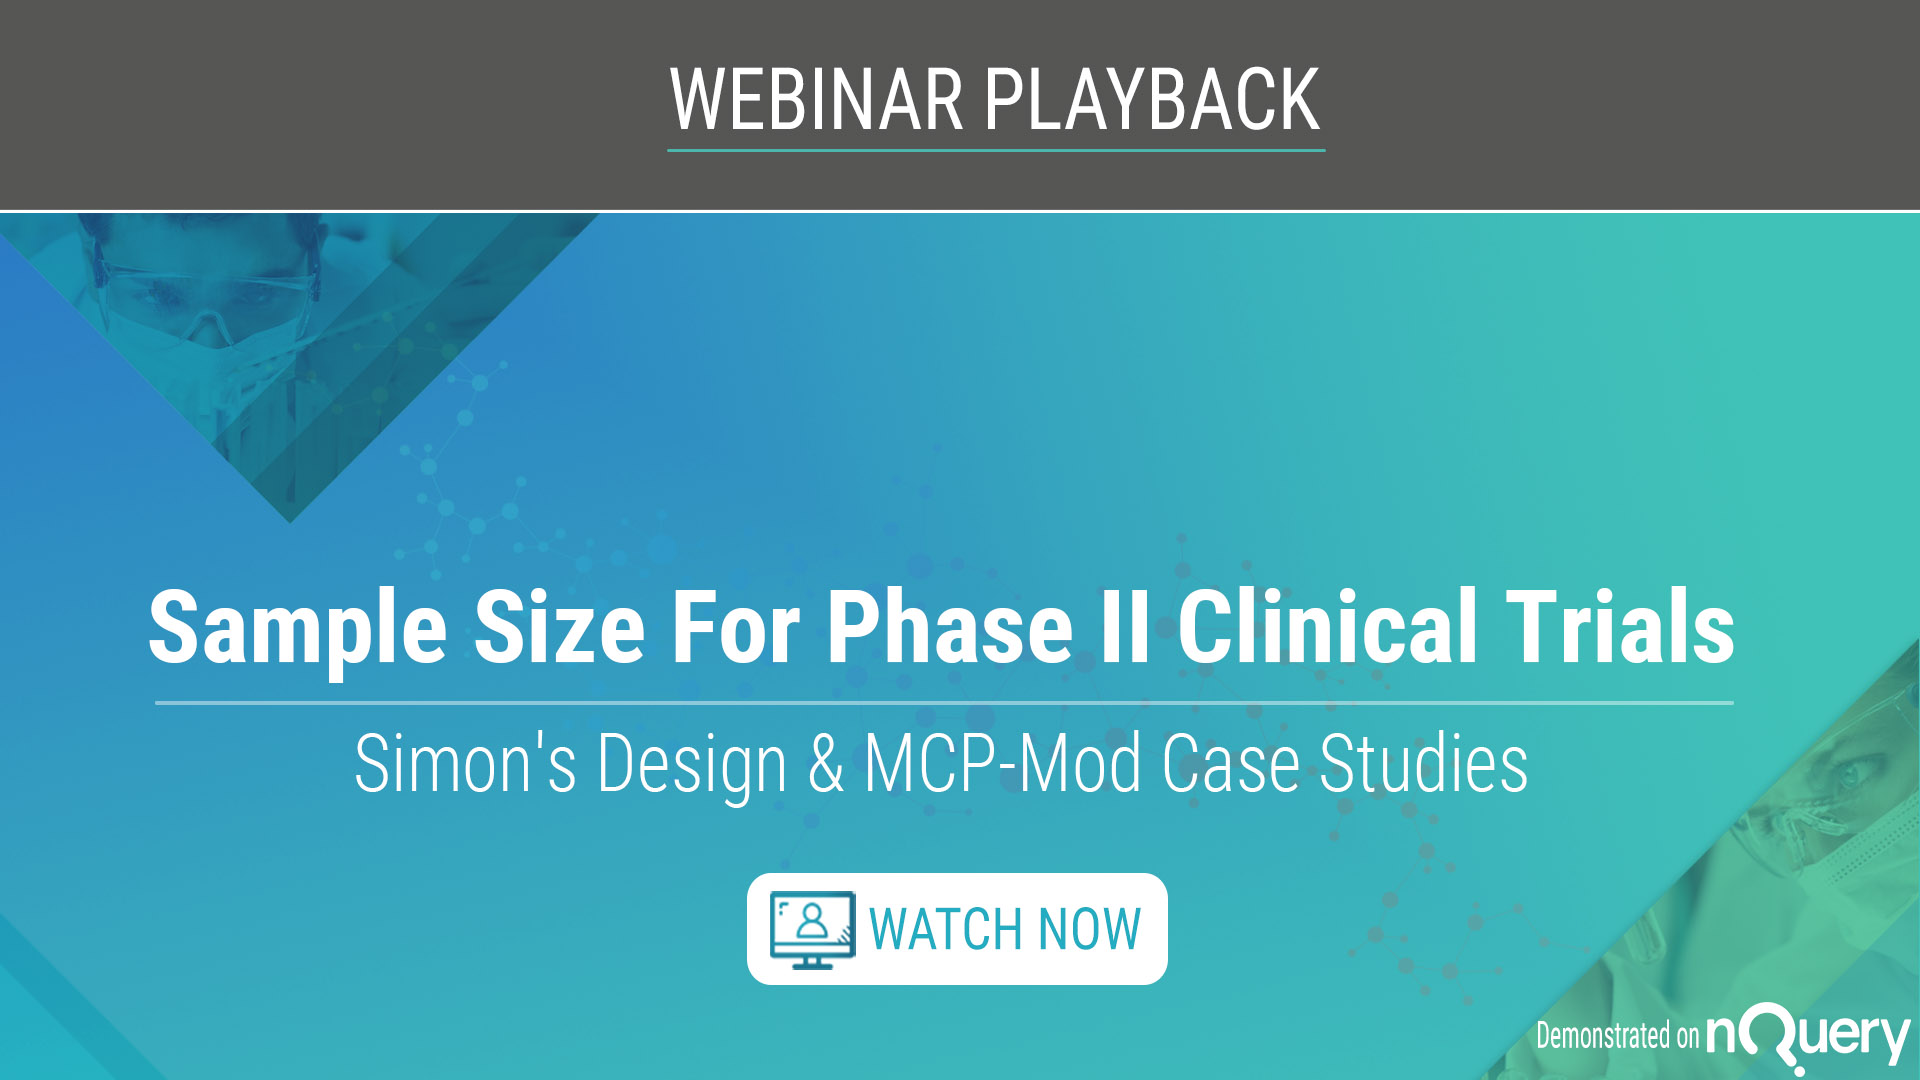 sample-size-for-phase-ii-clinical-trials-nQuery-Webinar-on-demand